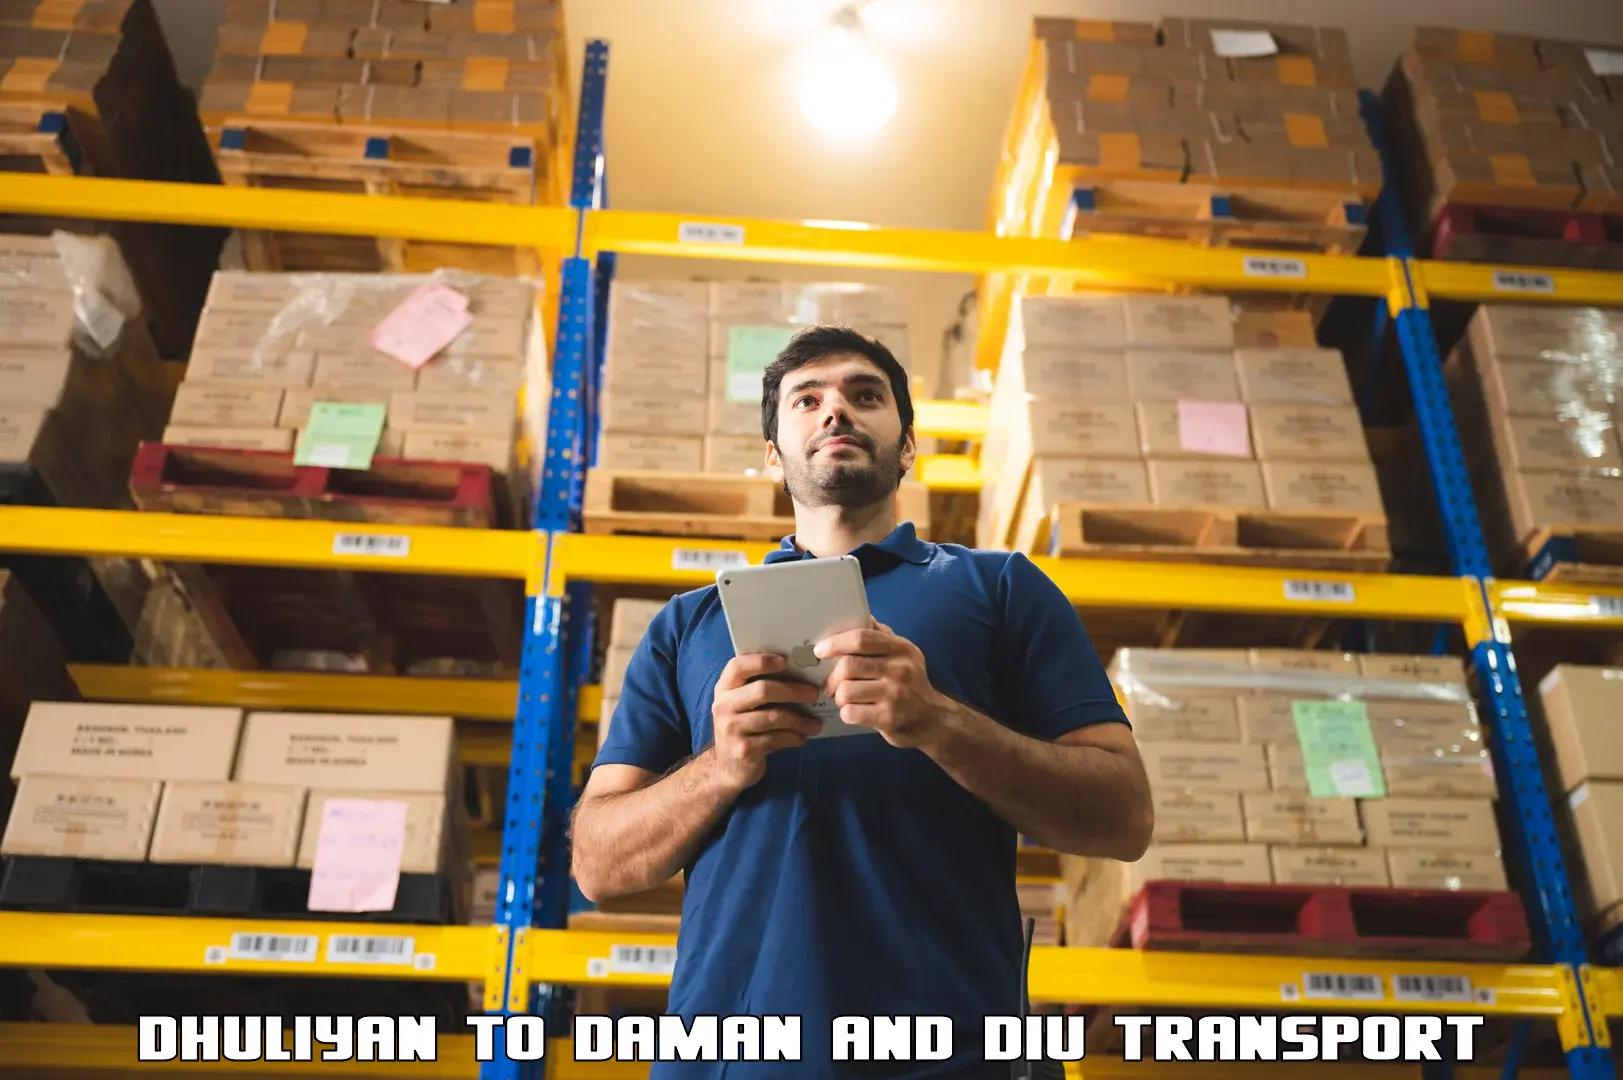 Daily parcel service transport Dhuliyan to Daman and Diu